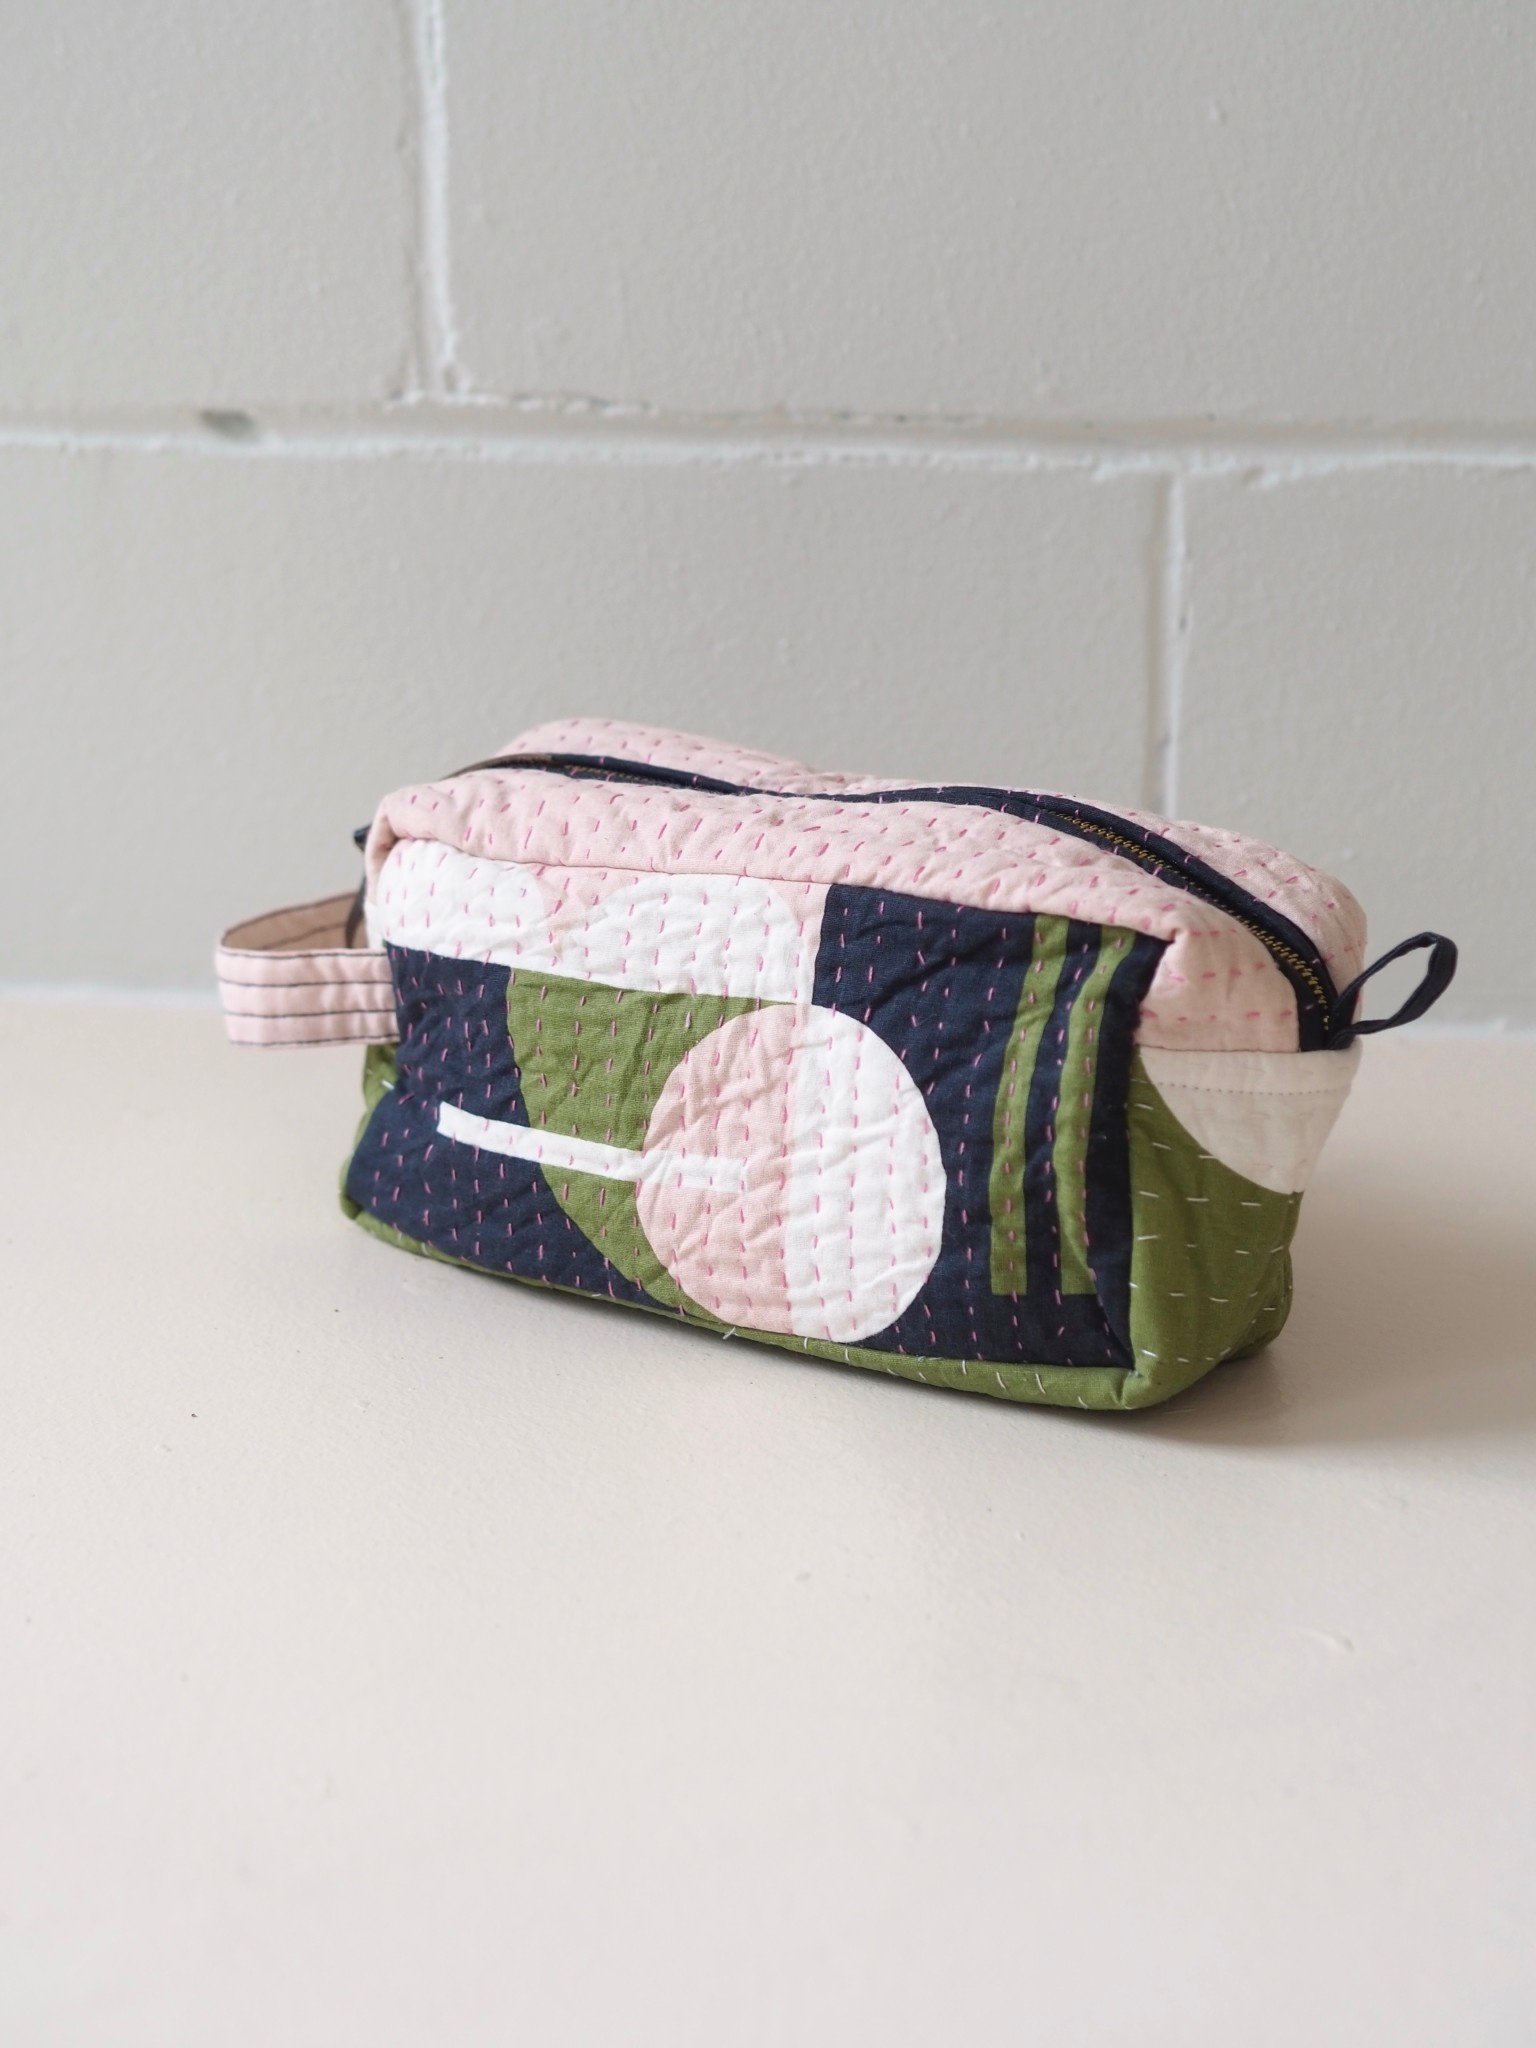 Formation Toiletry Bag Blue/Green/Pink